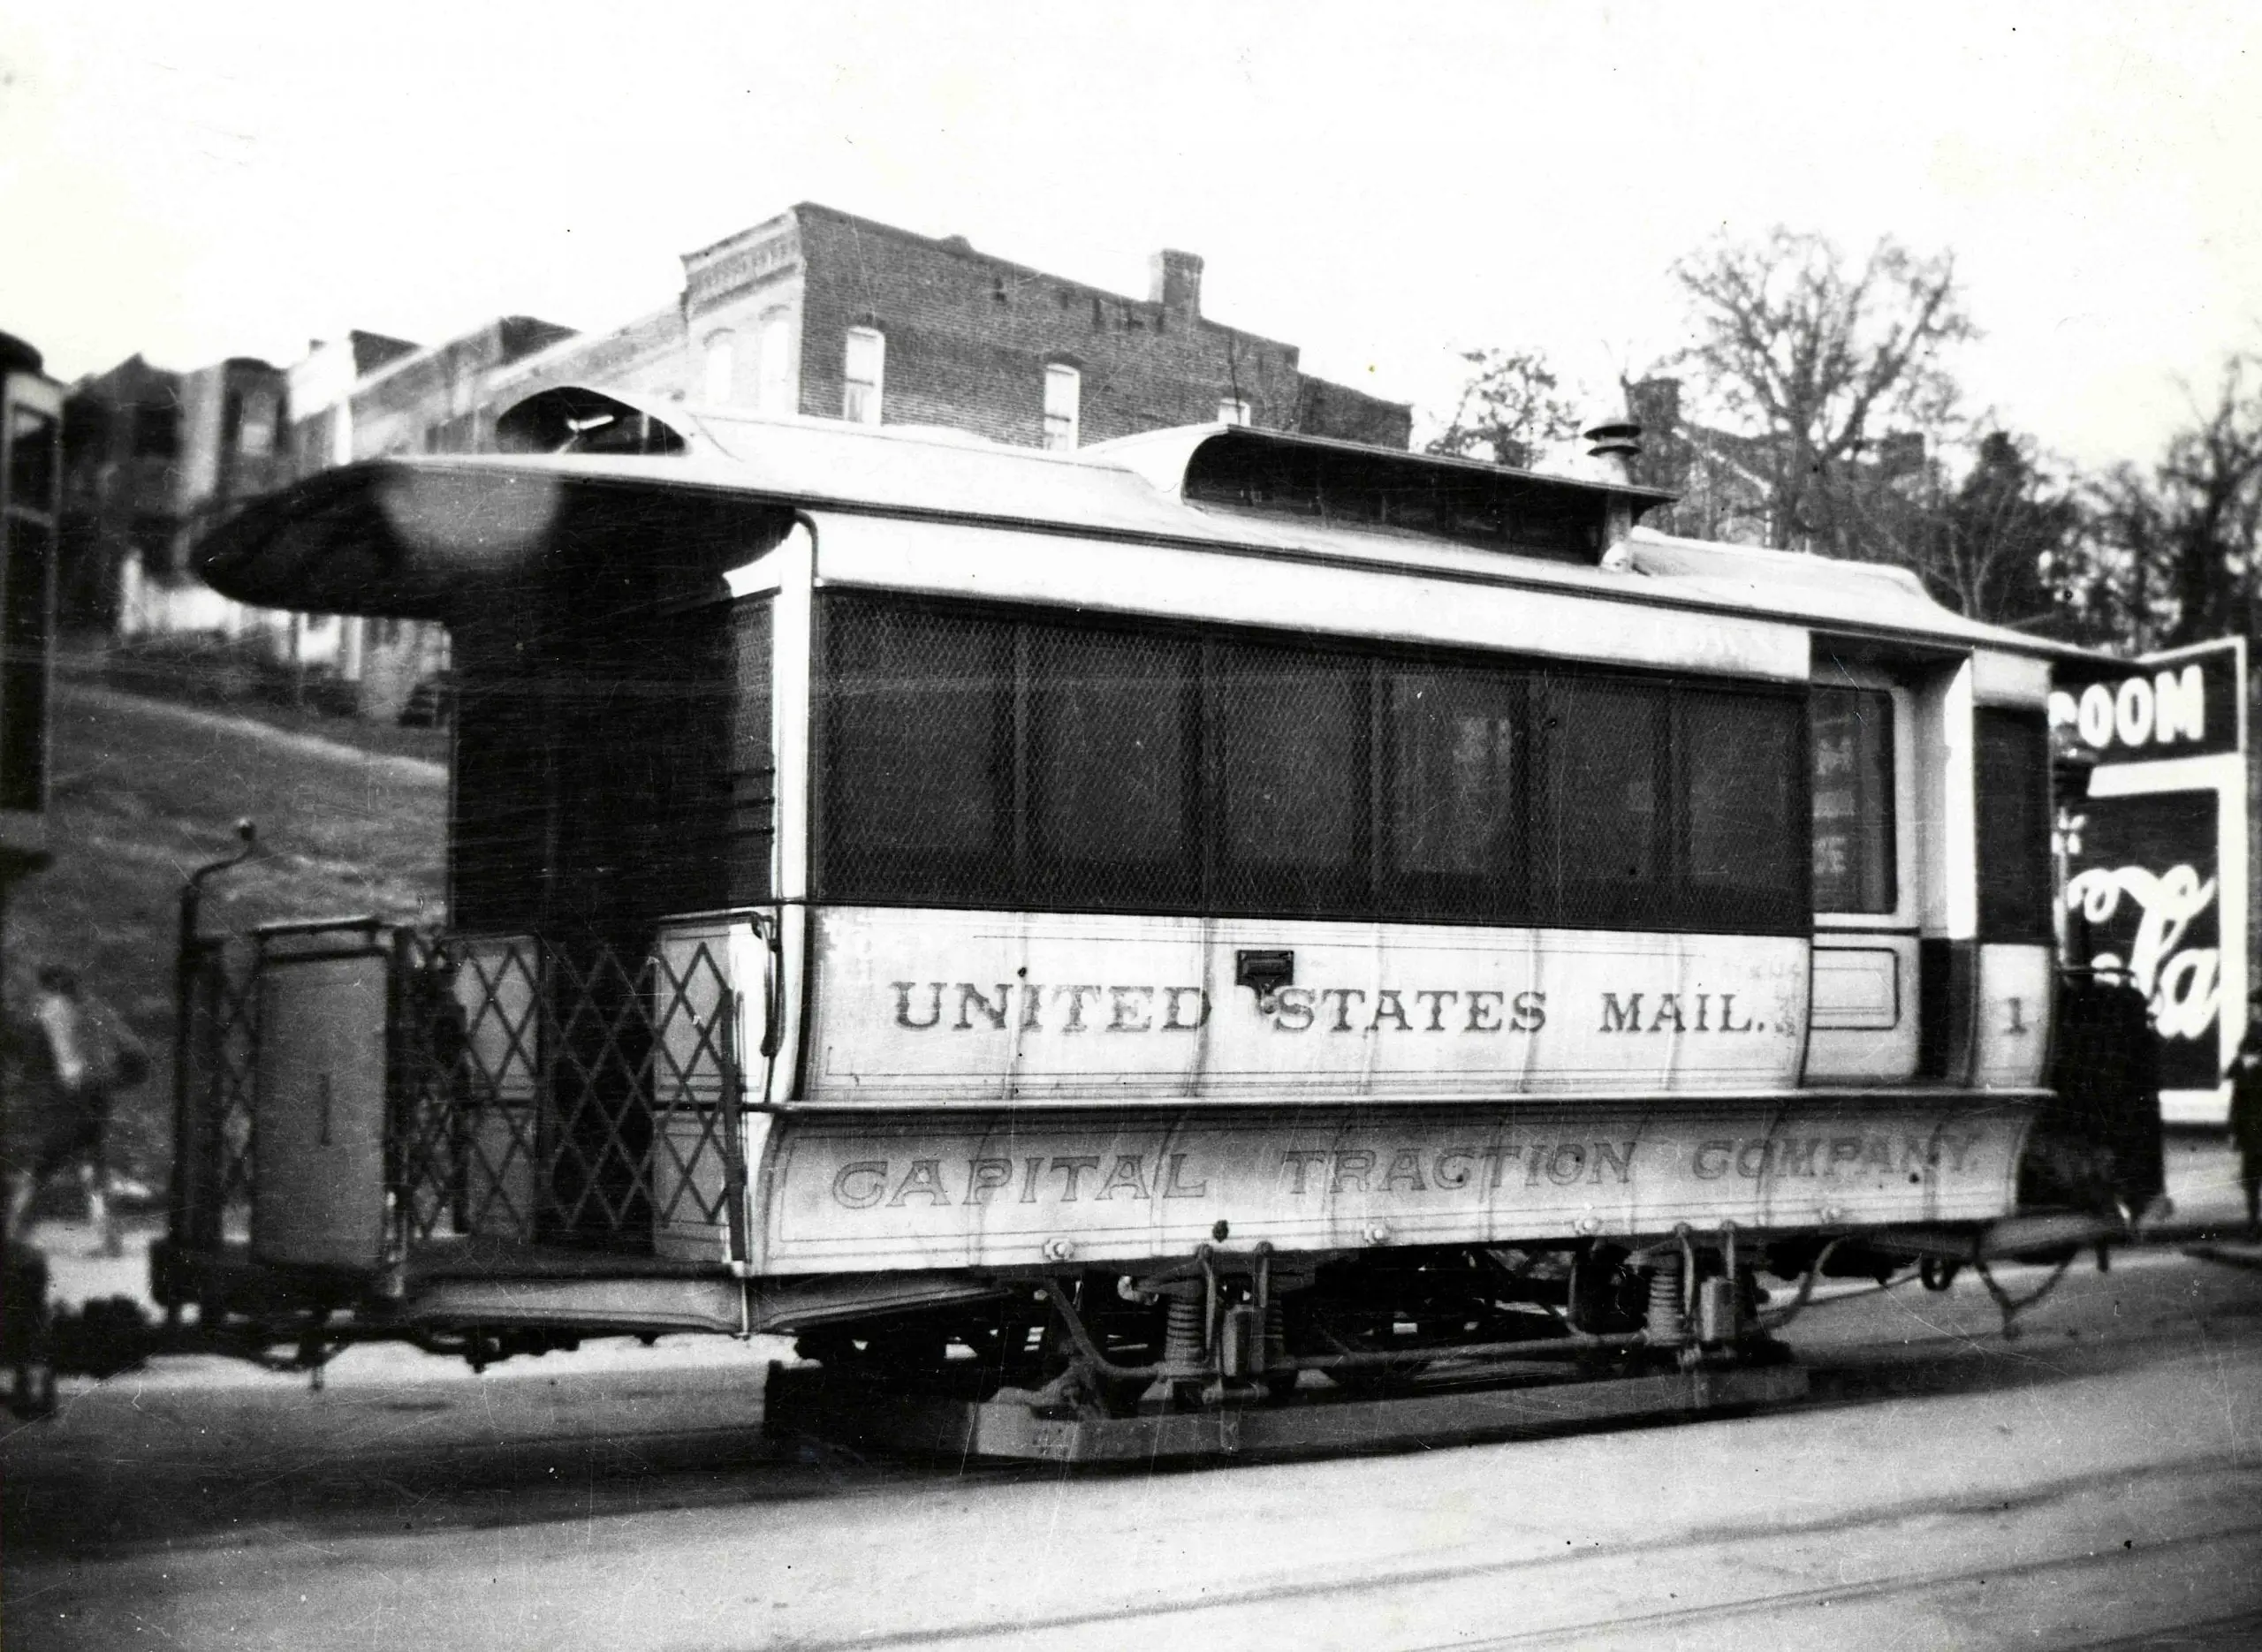 This U.S. mail streetcar, owned and operated by the Capital Traction Company, was used to process and transport mail in Washington, DC.